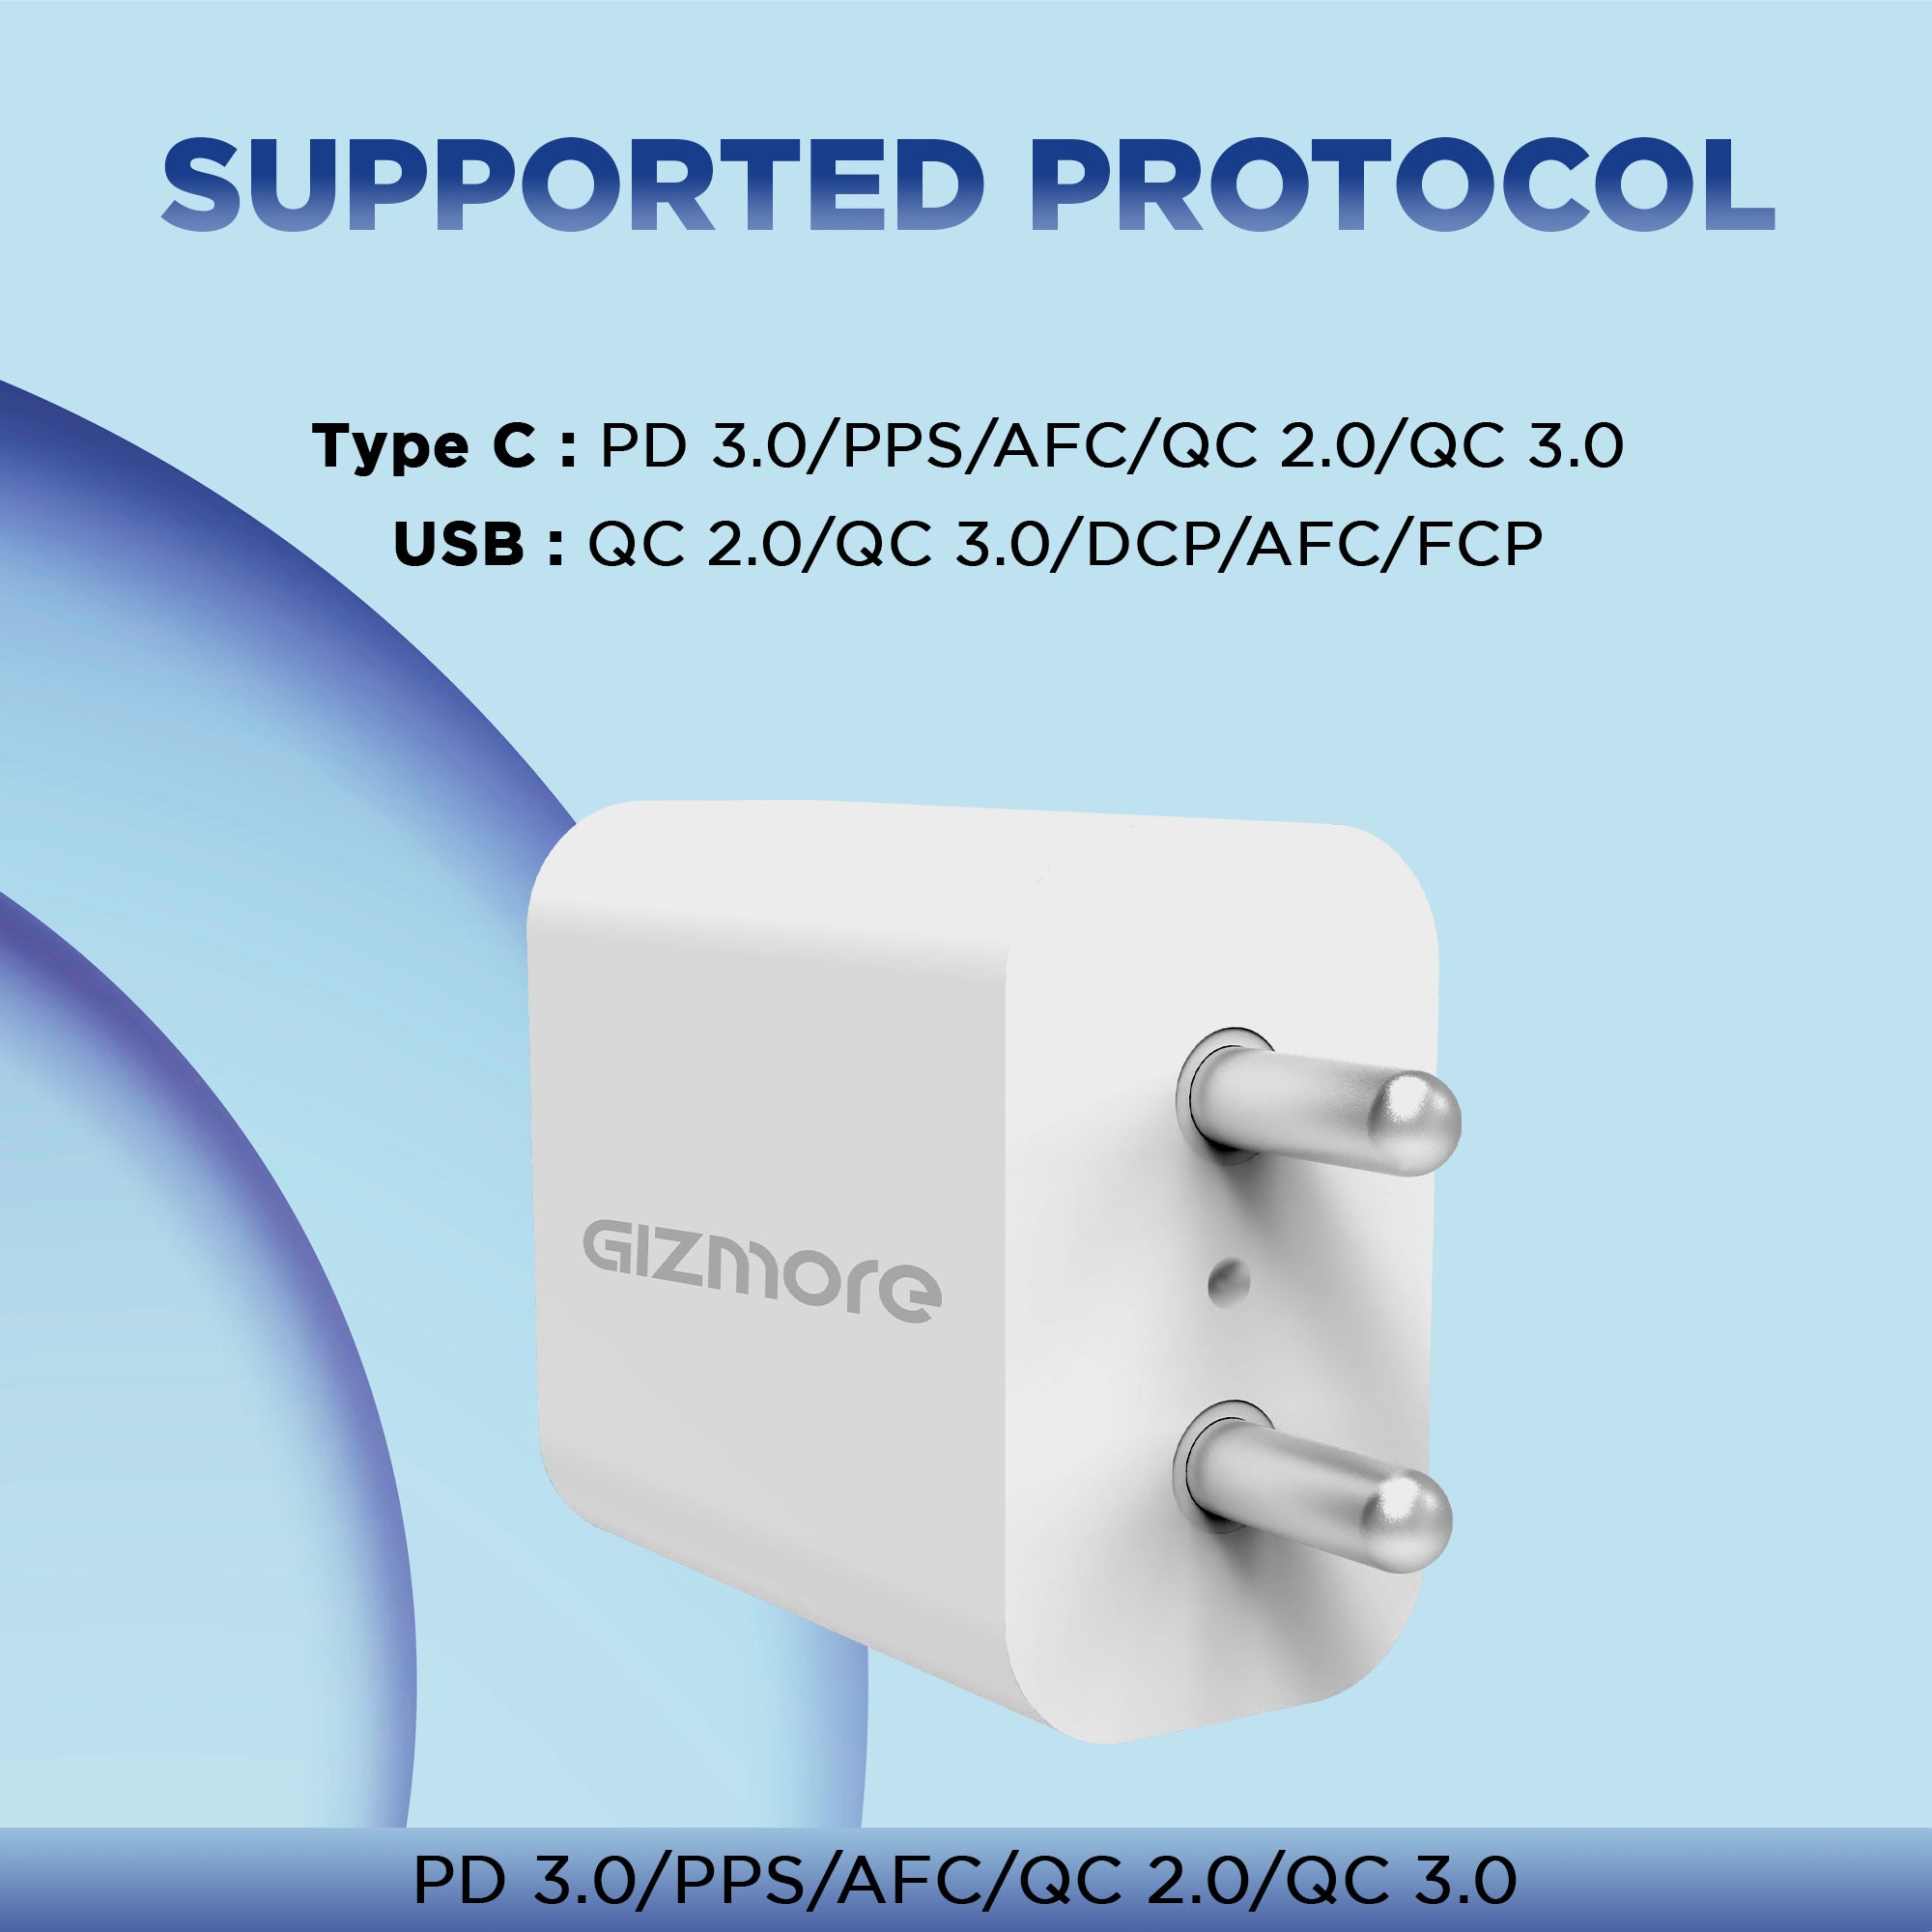 Gizmore 25 W Quick Charge 3 A Mobile PA611 Super Fast QCPD With Type C Port (BIS Certified, Universal Compatible) Charger (White)